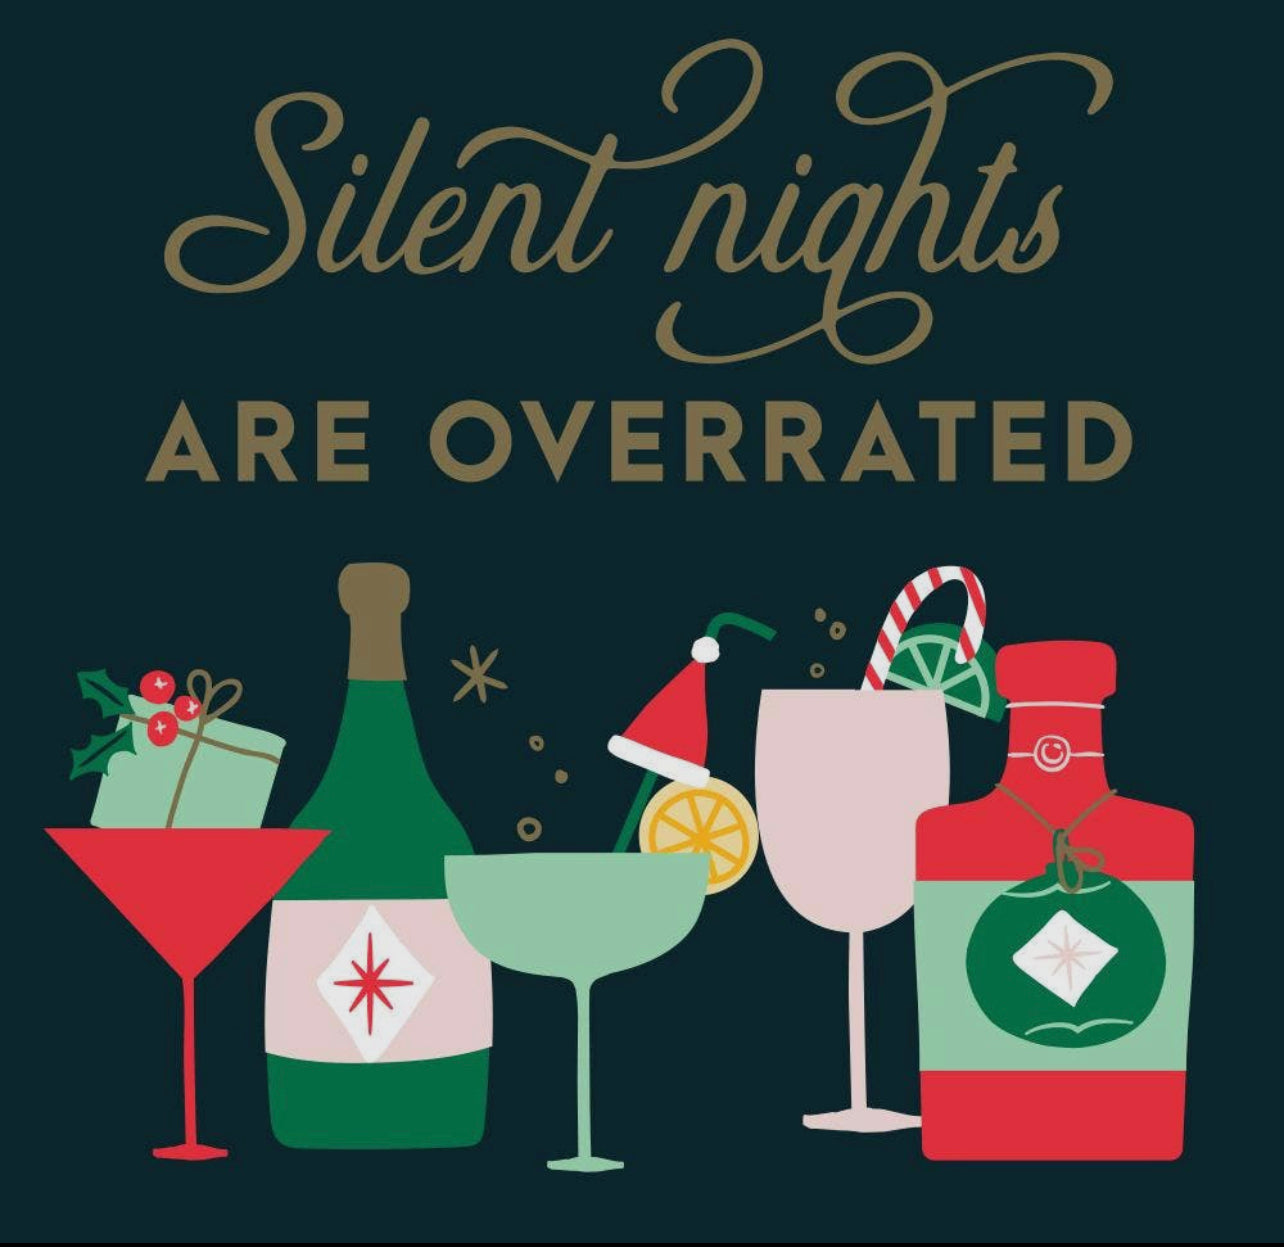 Christmas cocktail party napkins with a dark green background, differnt cocktail glassess and bottles are featured across the bottom in festive colors, and across the top in gold are the words "silent nights are overrated"